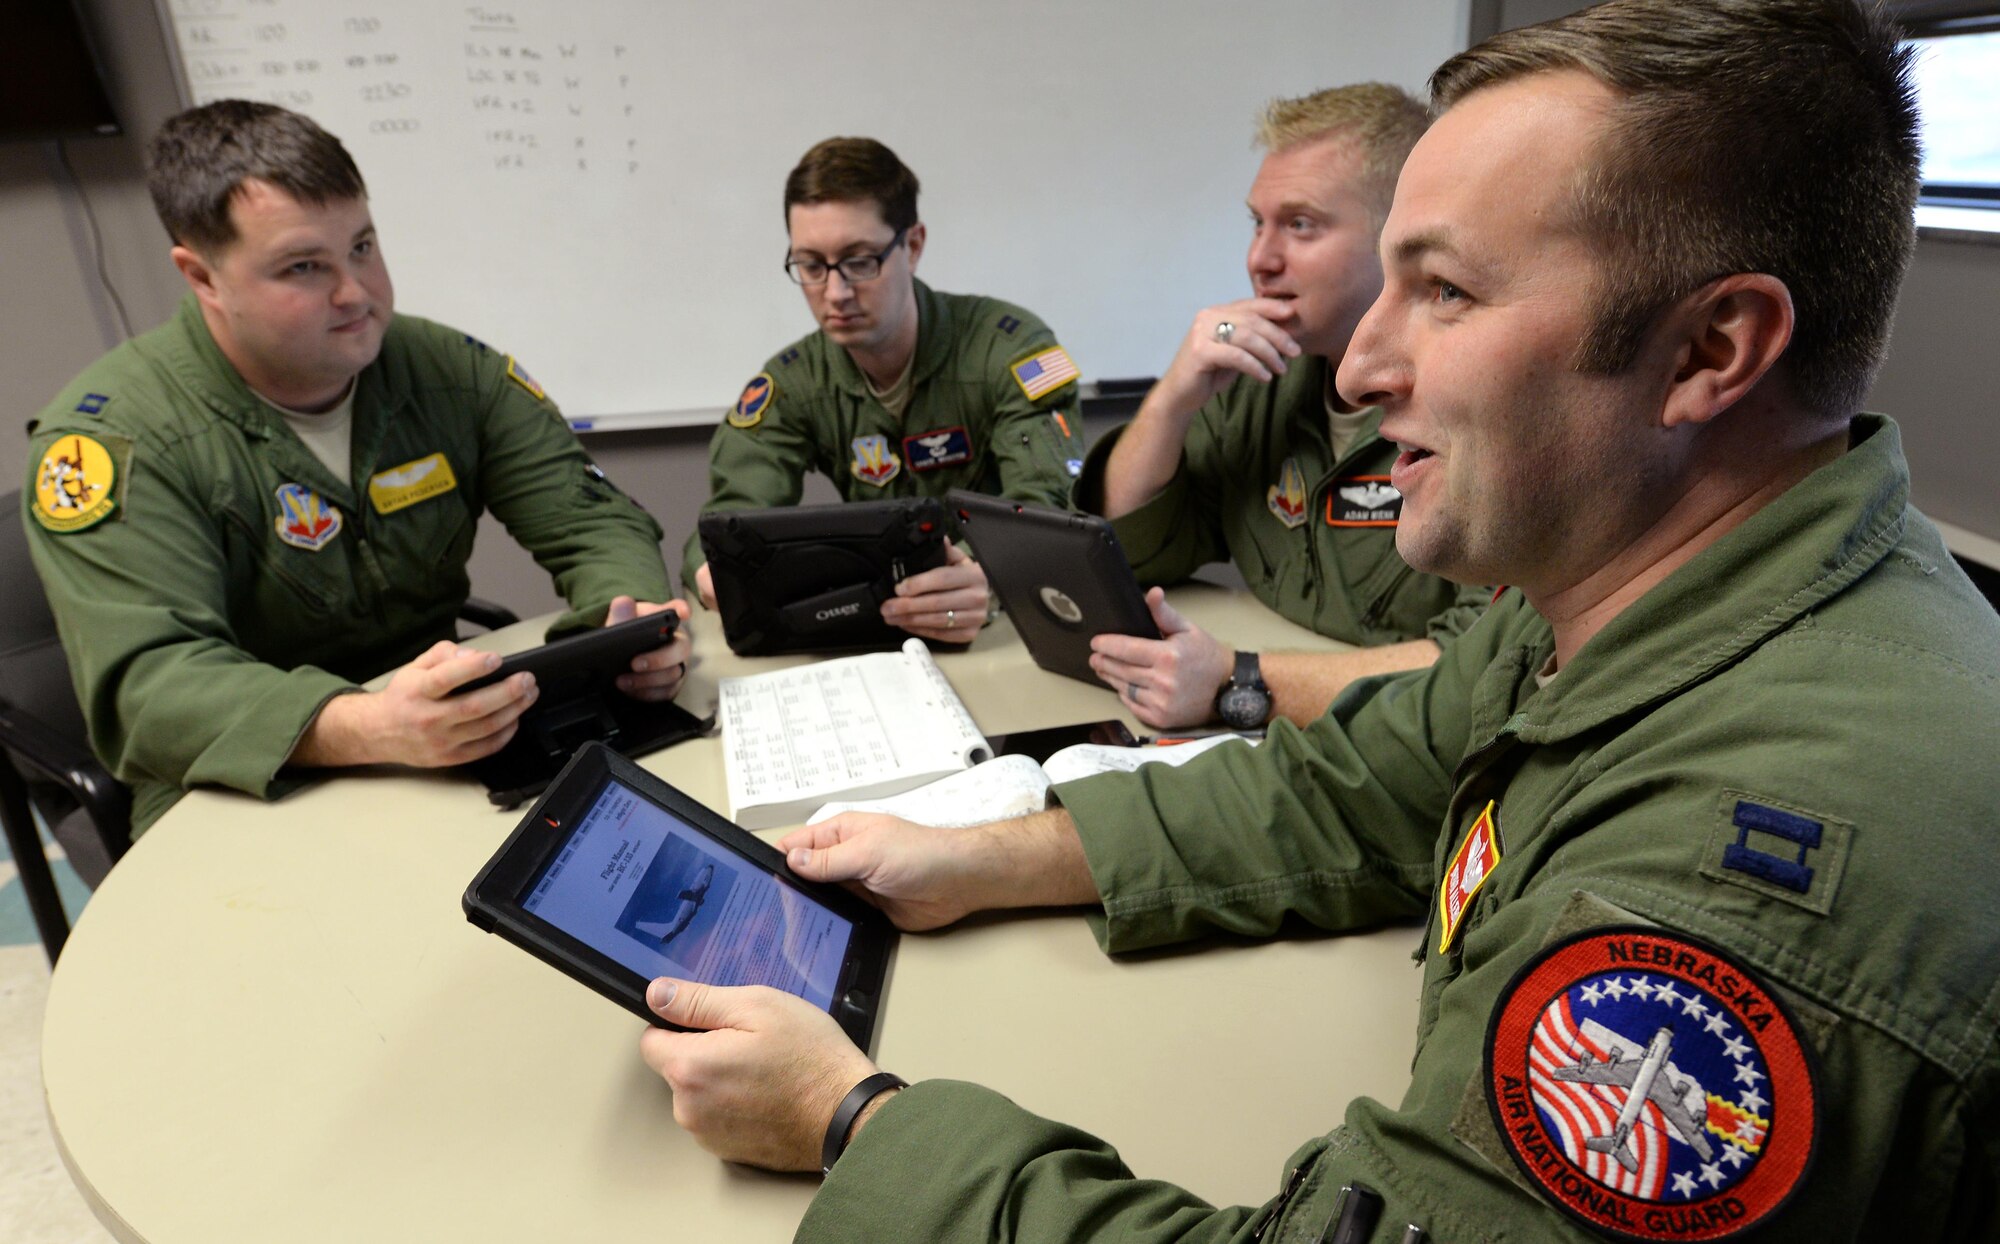 Capt. Bryan Allebone (right), an instructor navigator and fulltime Air National Guard member assigned to the 238th Combat Training Squadron, does mission planning with other Offutt aircrew members Dec. 12, 2016 at Offutt Air Force Base, Neb. The crew members are using electronic flight bags on Apple iPads that have replaced much of the legacy paper processes. Allebone coordinated efforts to get an EFB program approved and stood up at Offutt. (U.S. Air Force photo by Delanie Stafford)